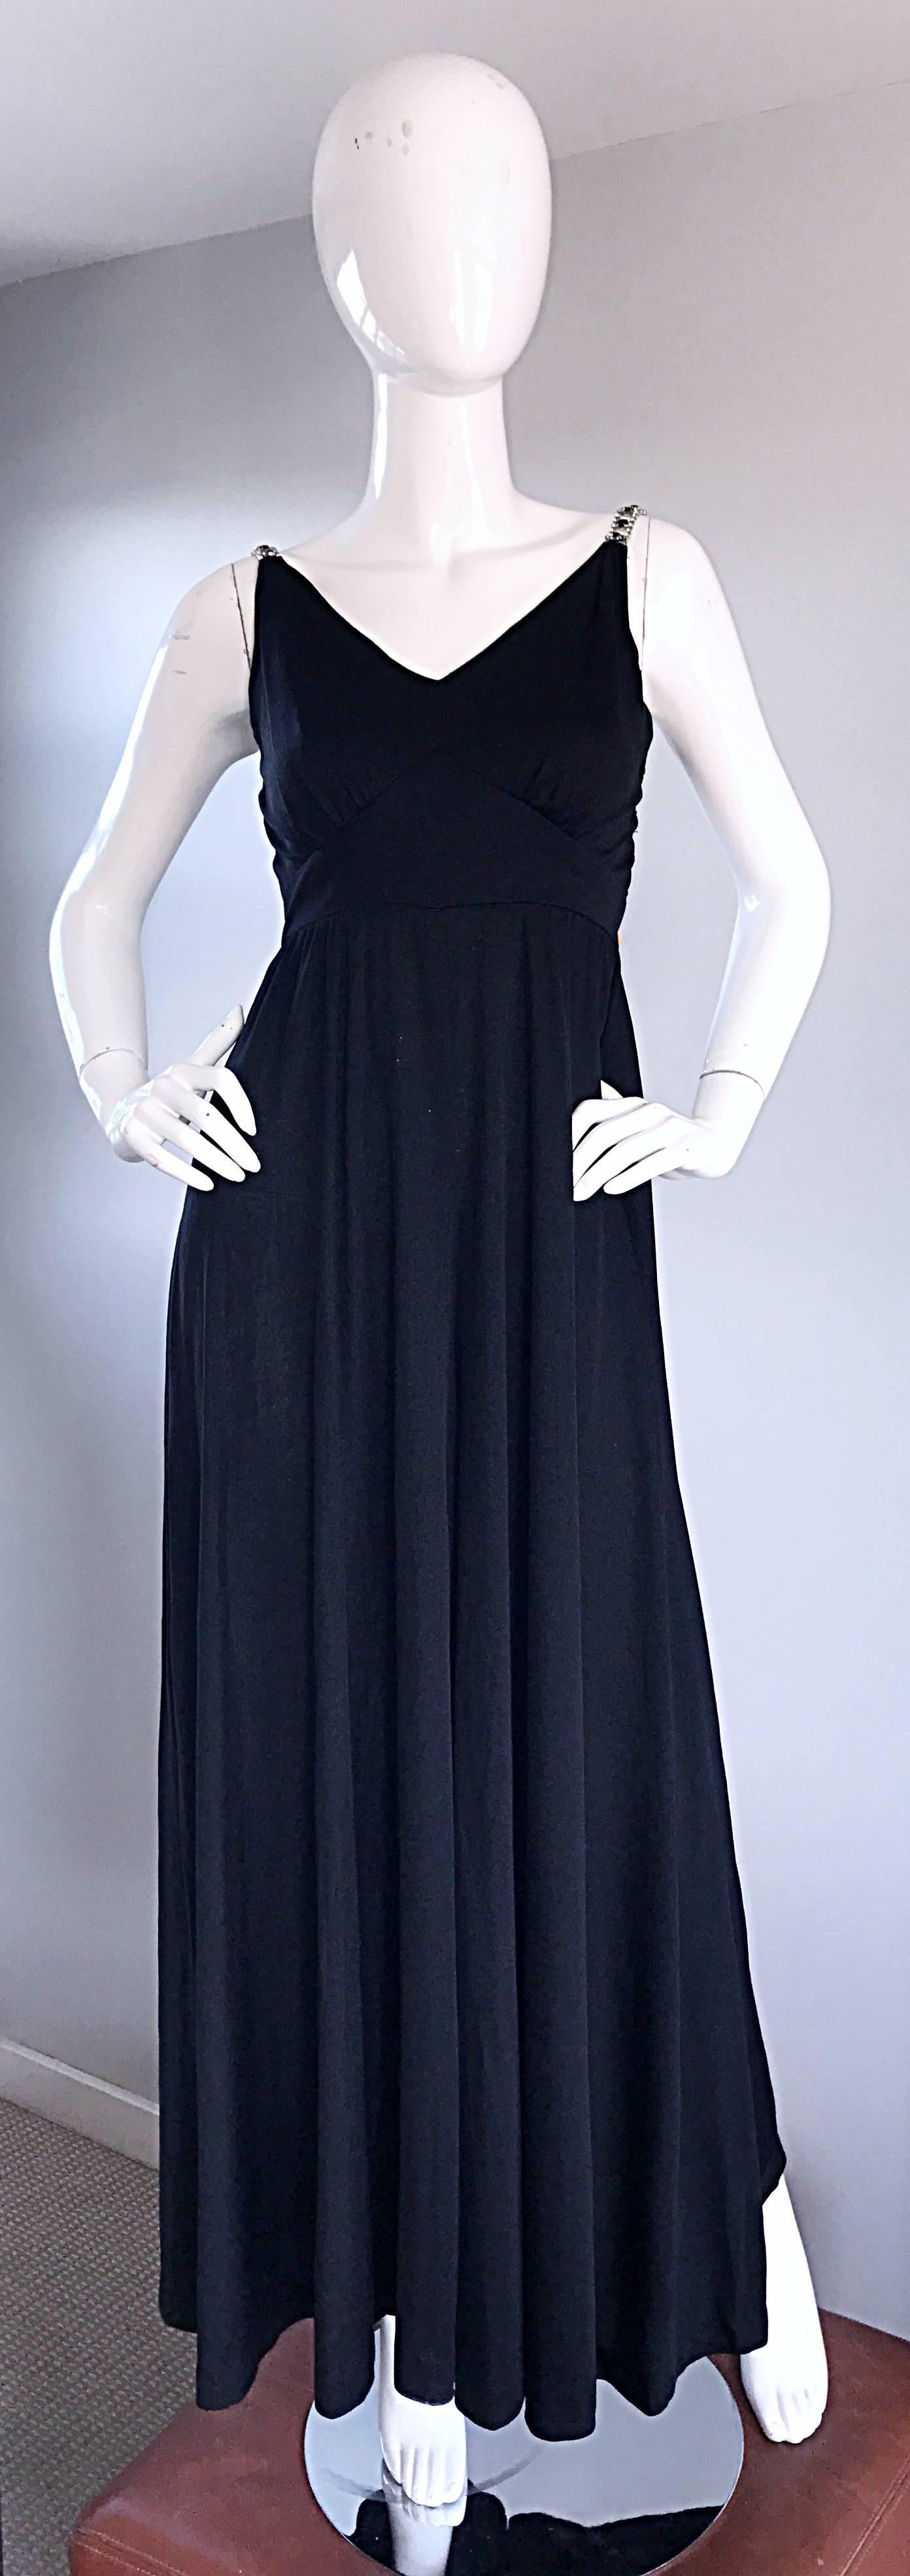 Sensational late 1960s / early 1970s 70s  PATTY PICKENS black jersey + rhinestone palazzo wide leg jumpsuit! Looks like a chic black gown, until you walk! Rhinestone straps, with black gem stones mixed in. Full metal zipper up the back with